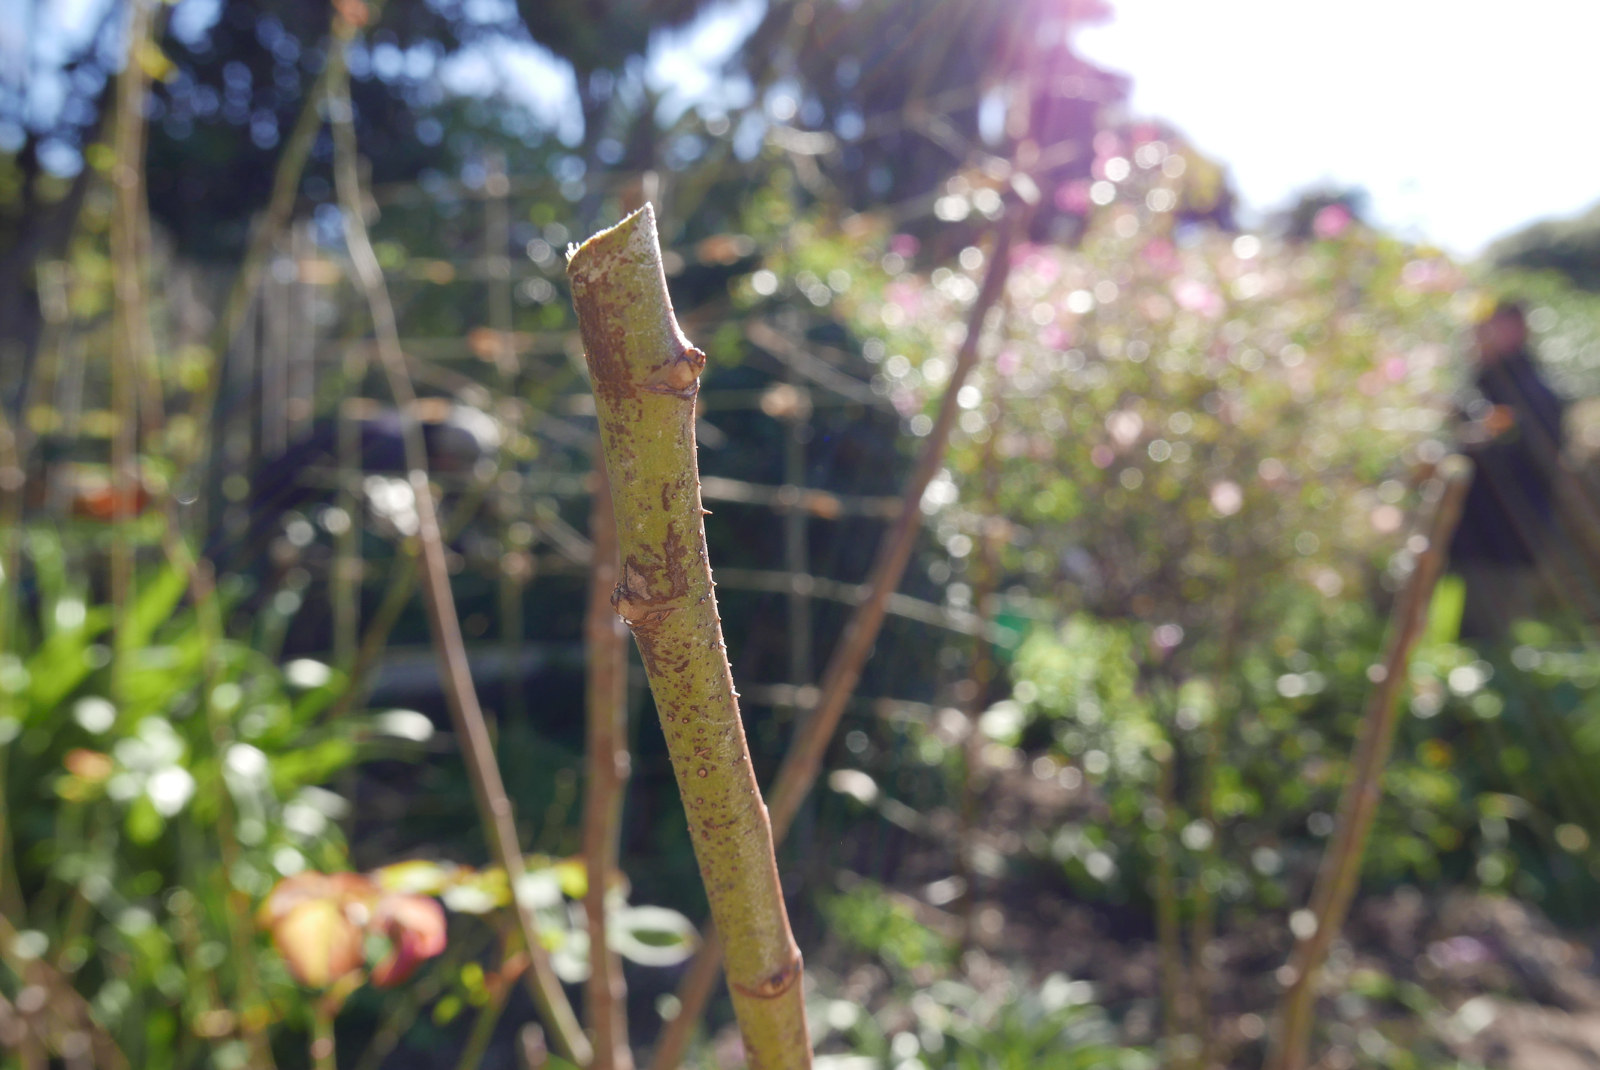 Image showing the rose bush stem freshly cut, with a 45 degree angle away from the bud.